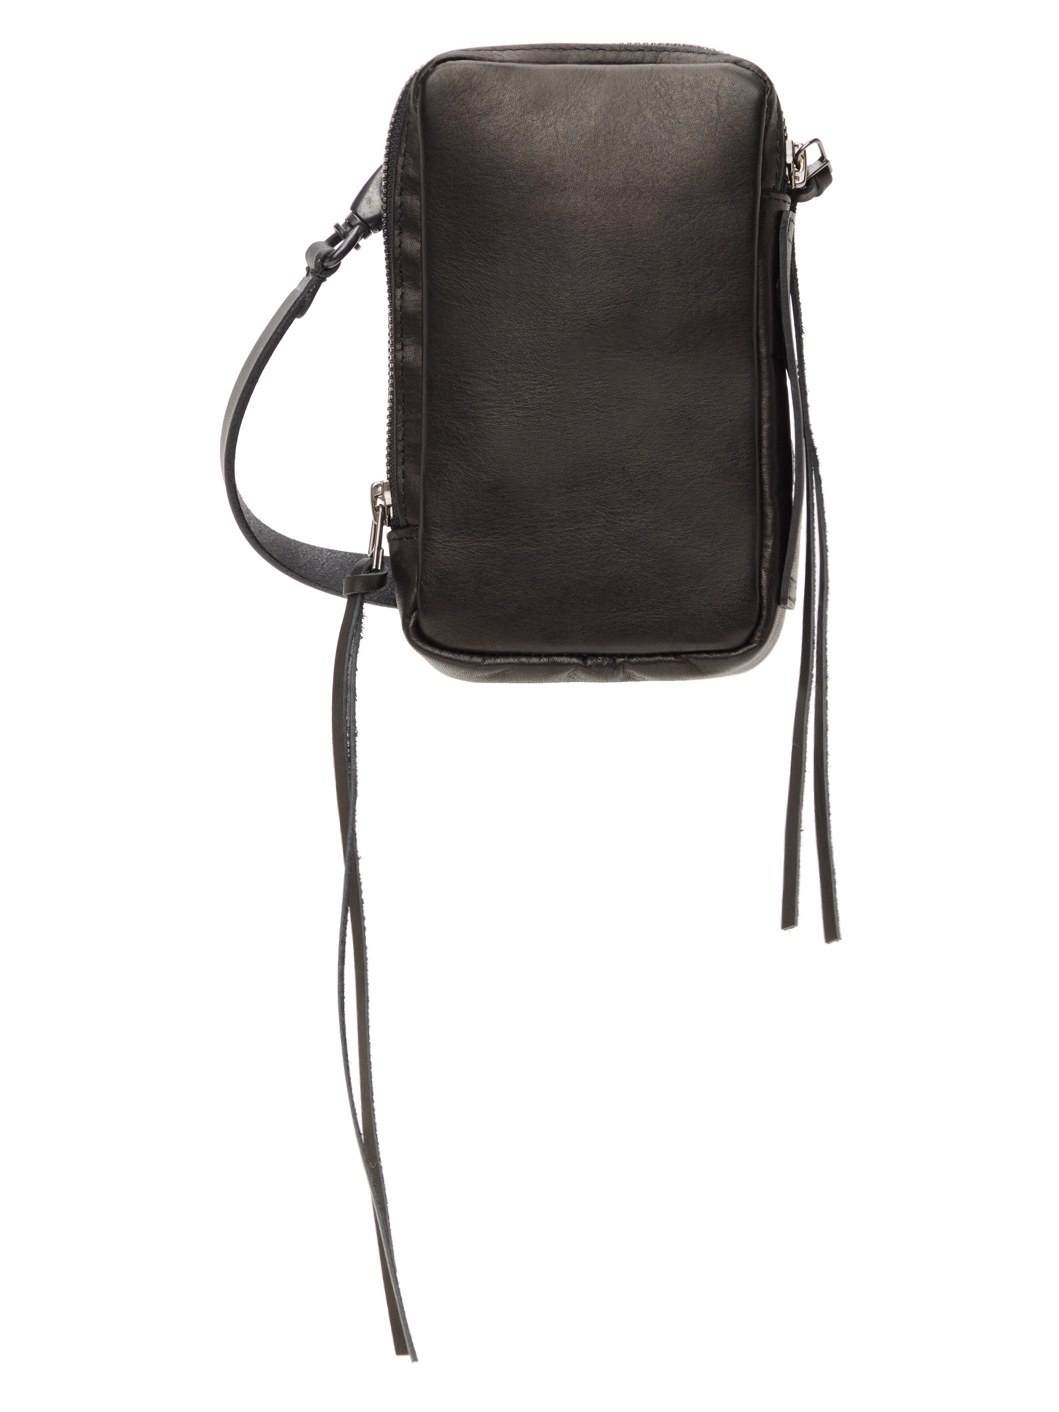 Black Leather Neck Pouch - 1